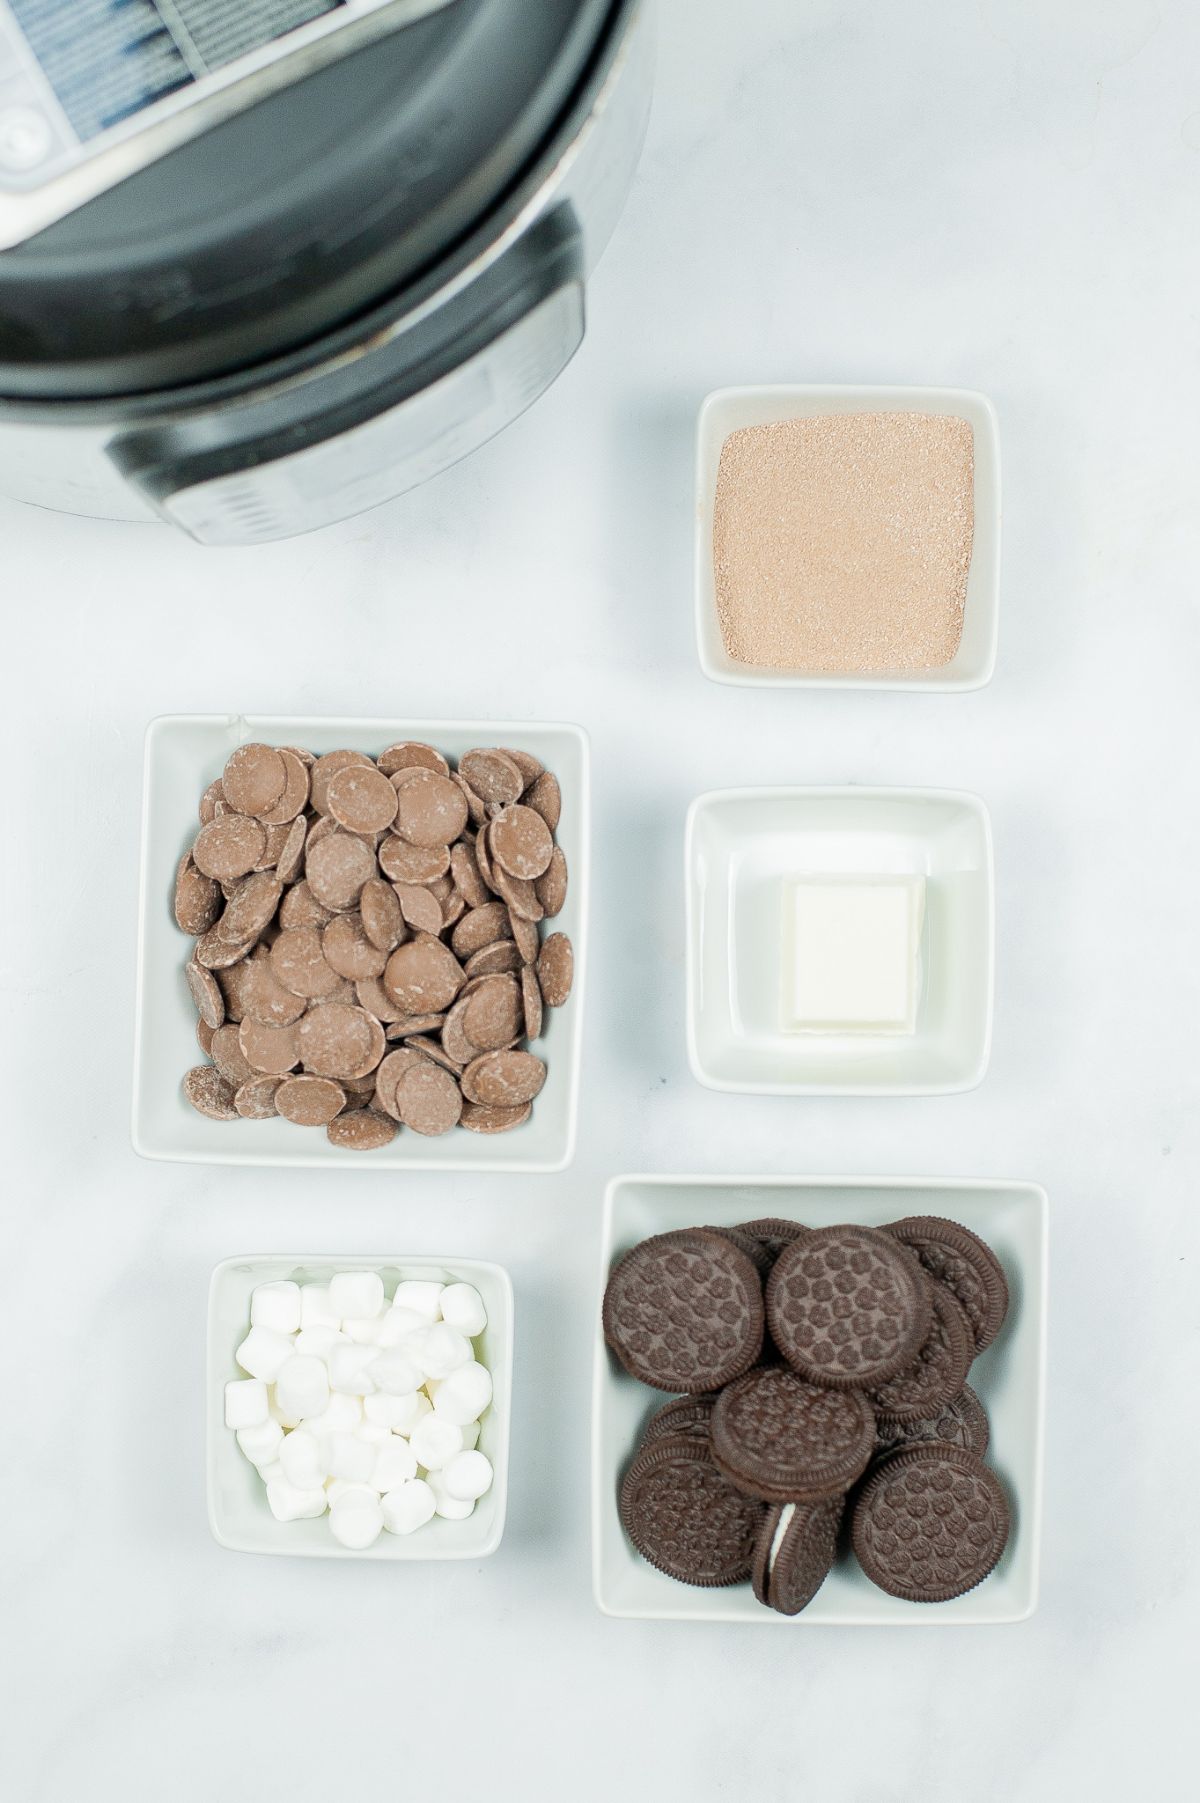 Ingredients used to make Cookies and Cream Hot Cocoa Bombs.